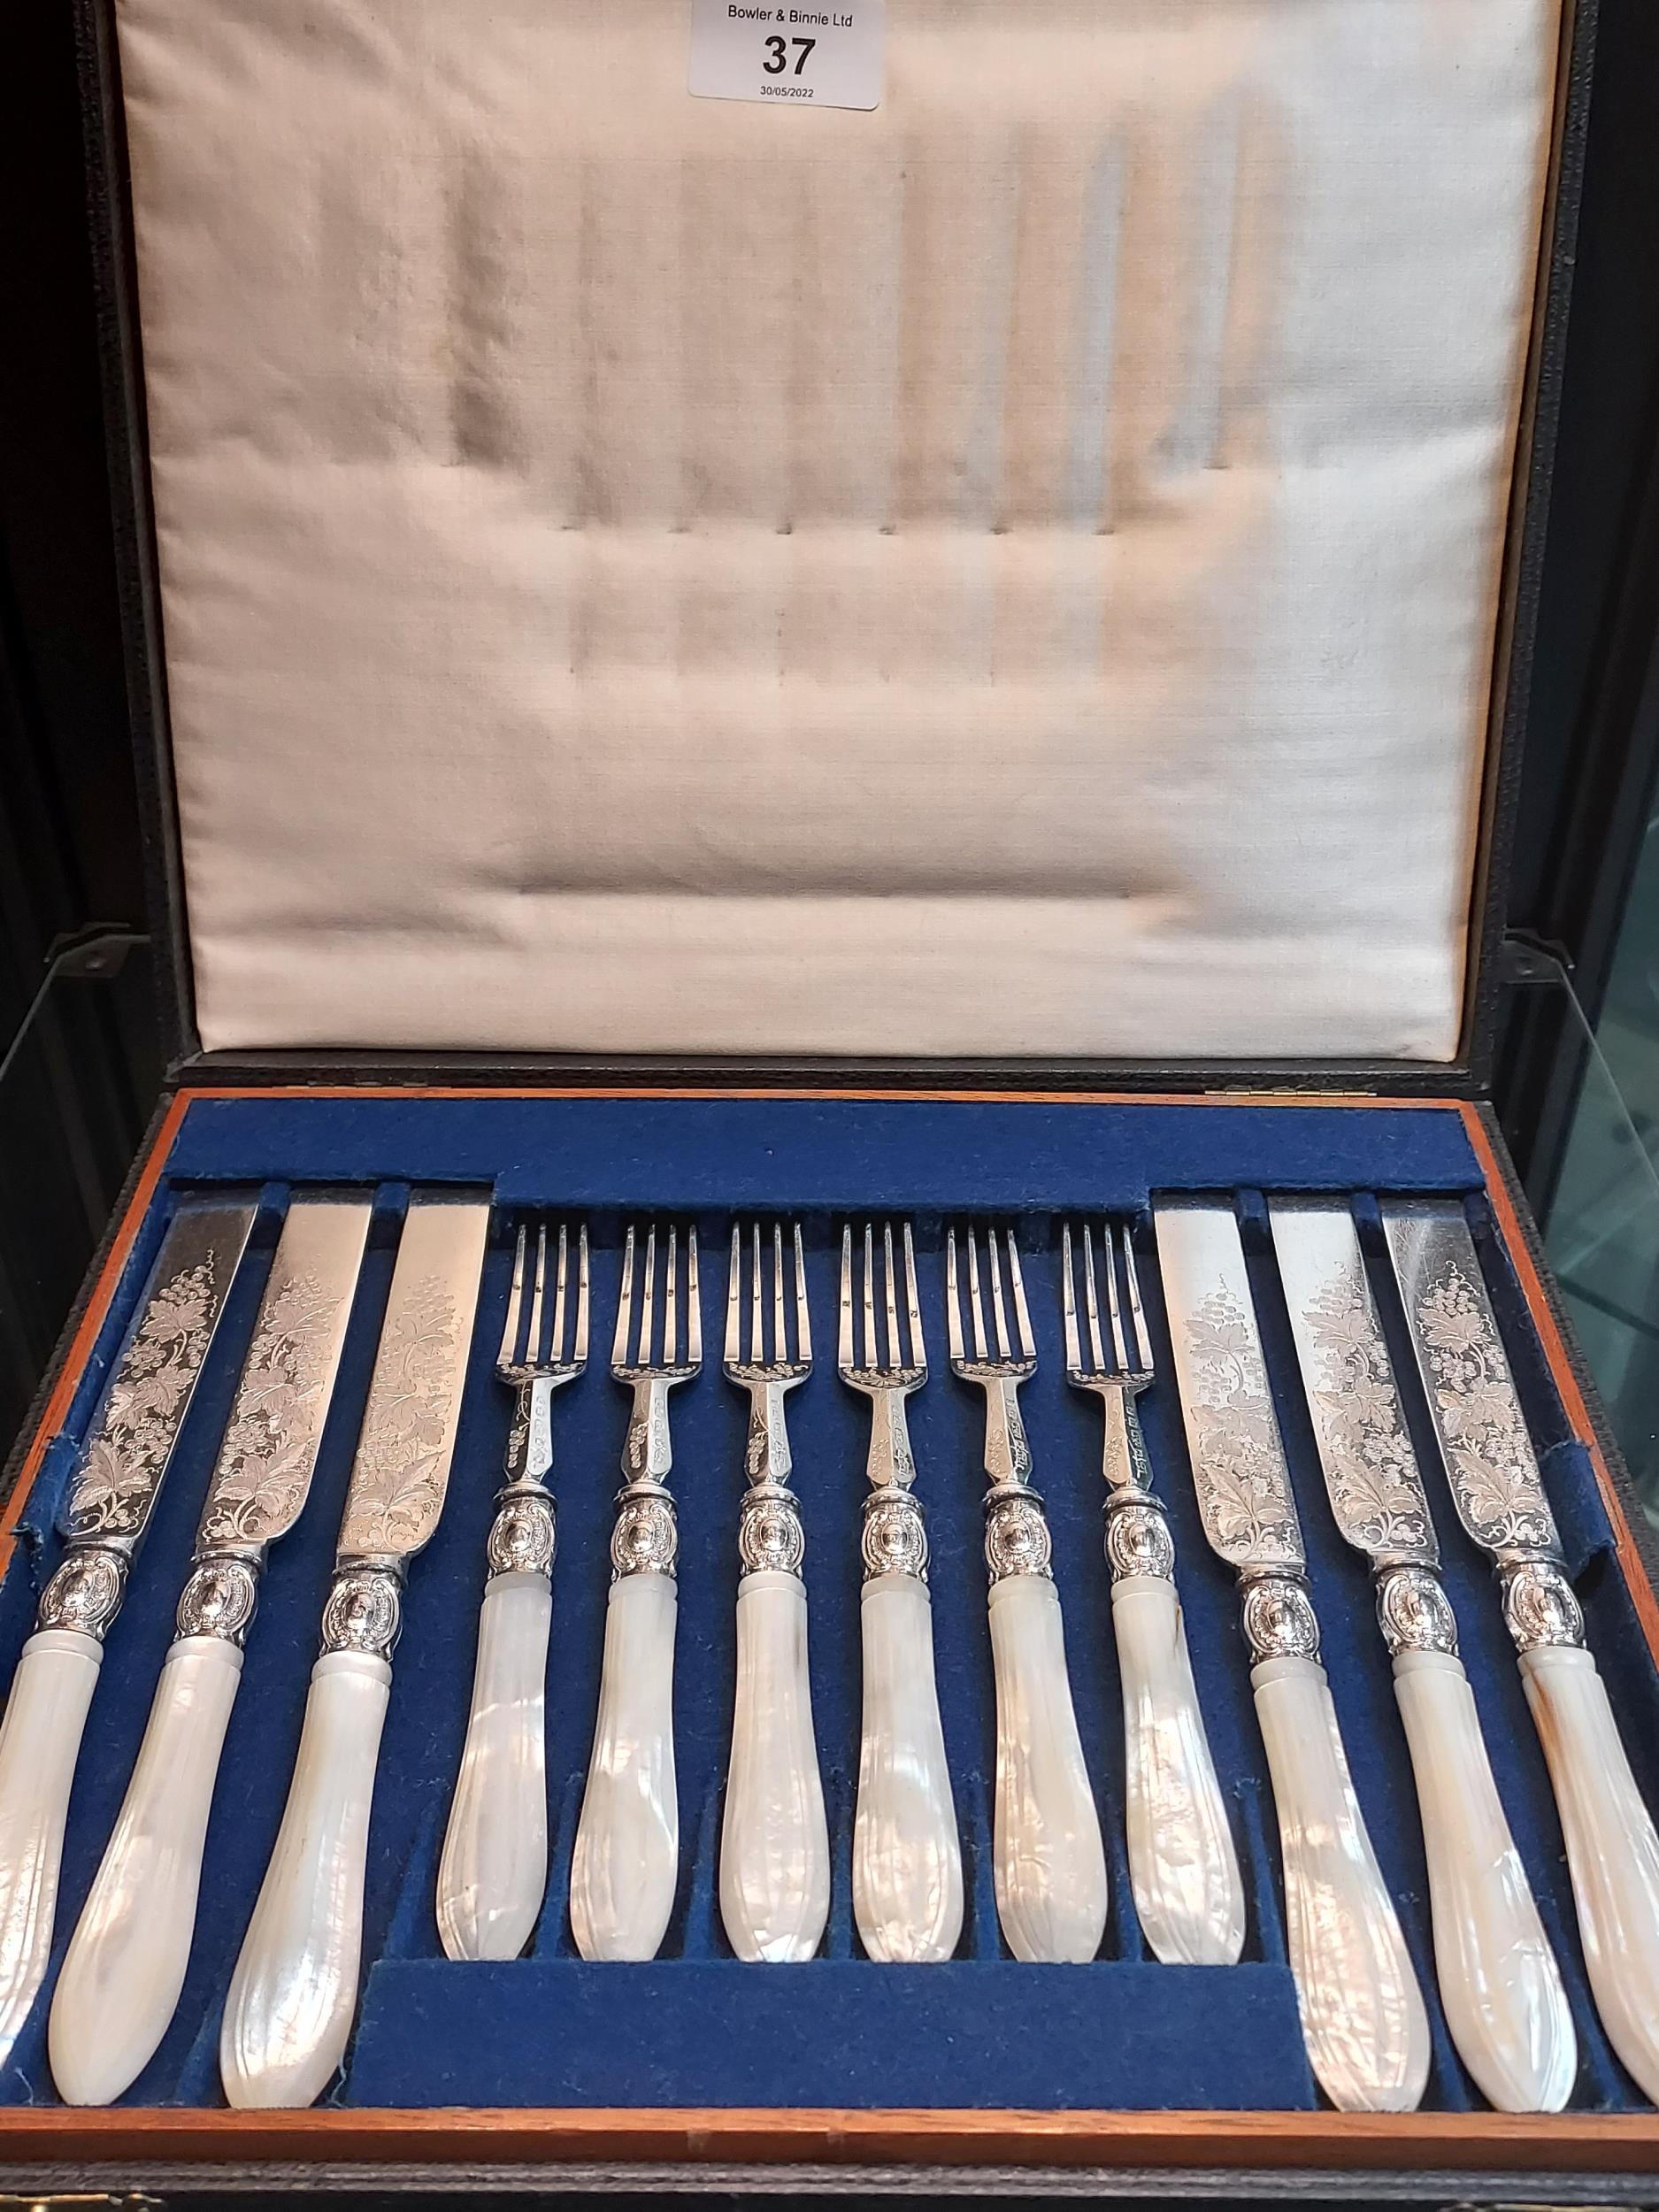 A Boxed set of twelve ornate knives and forks, designed with mother of pearl handles.